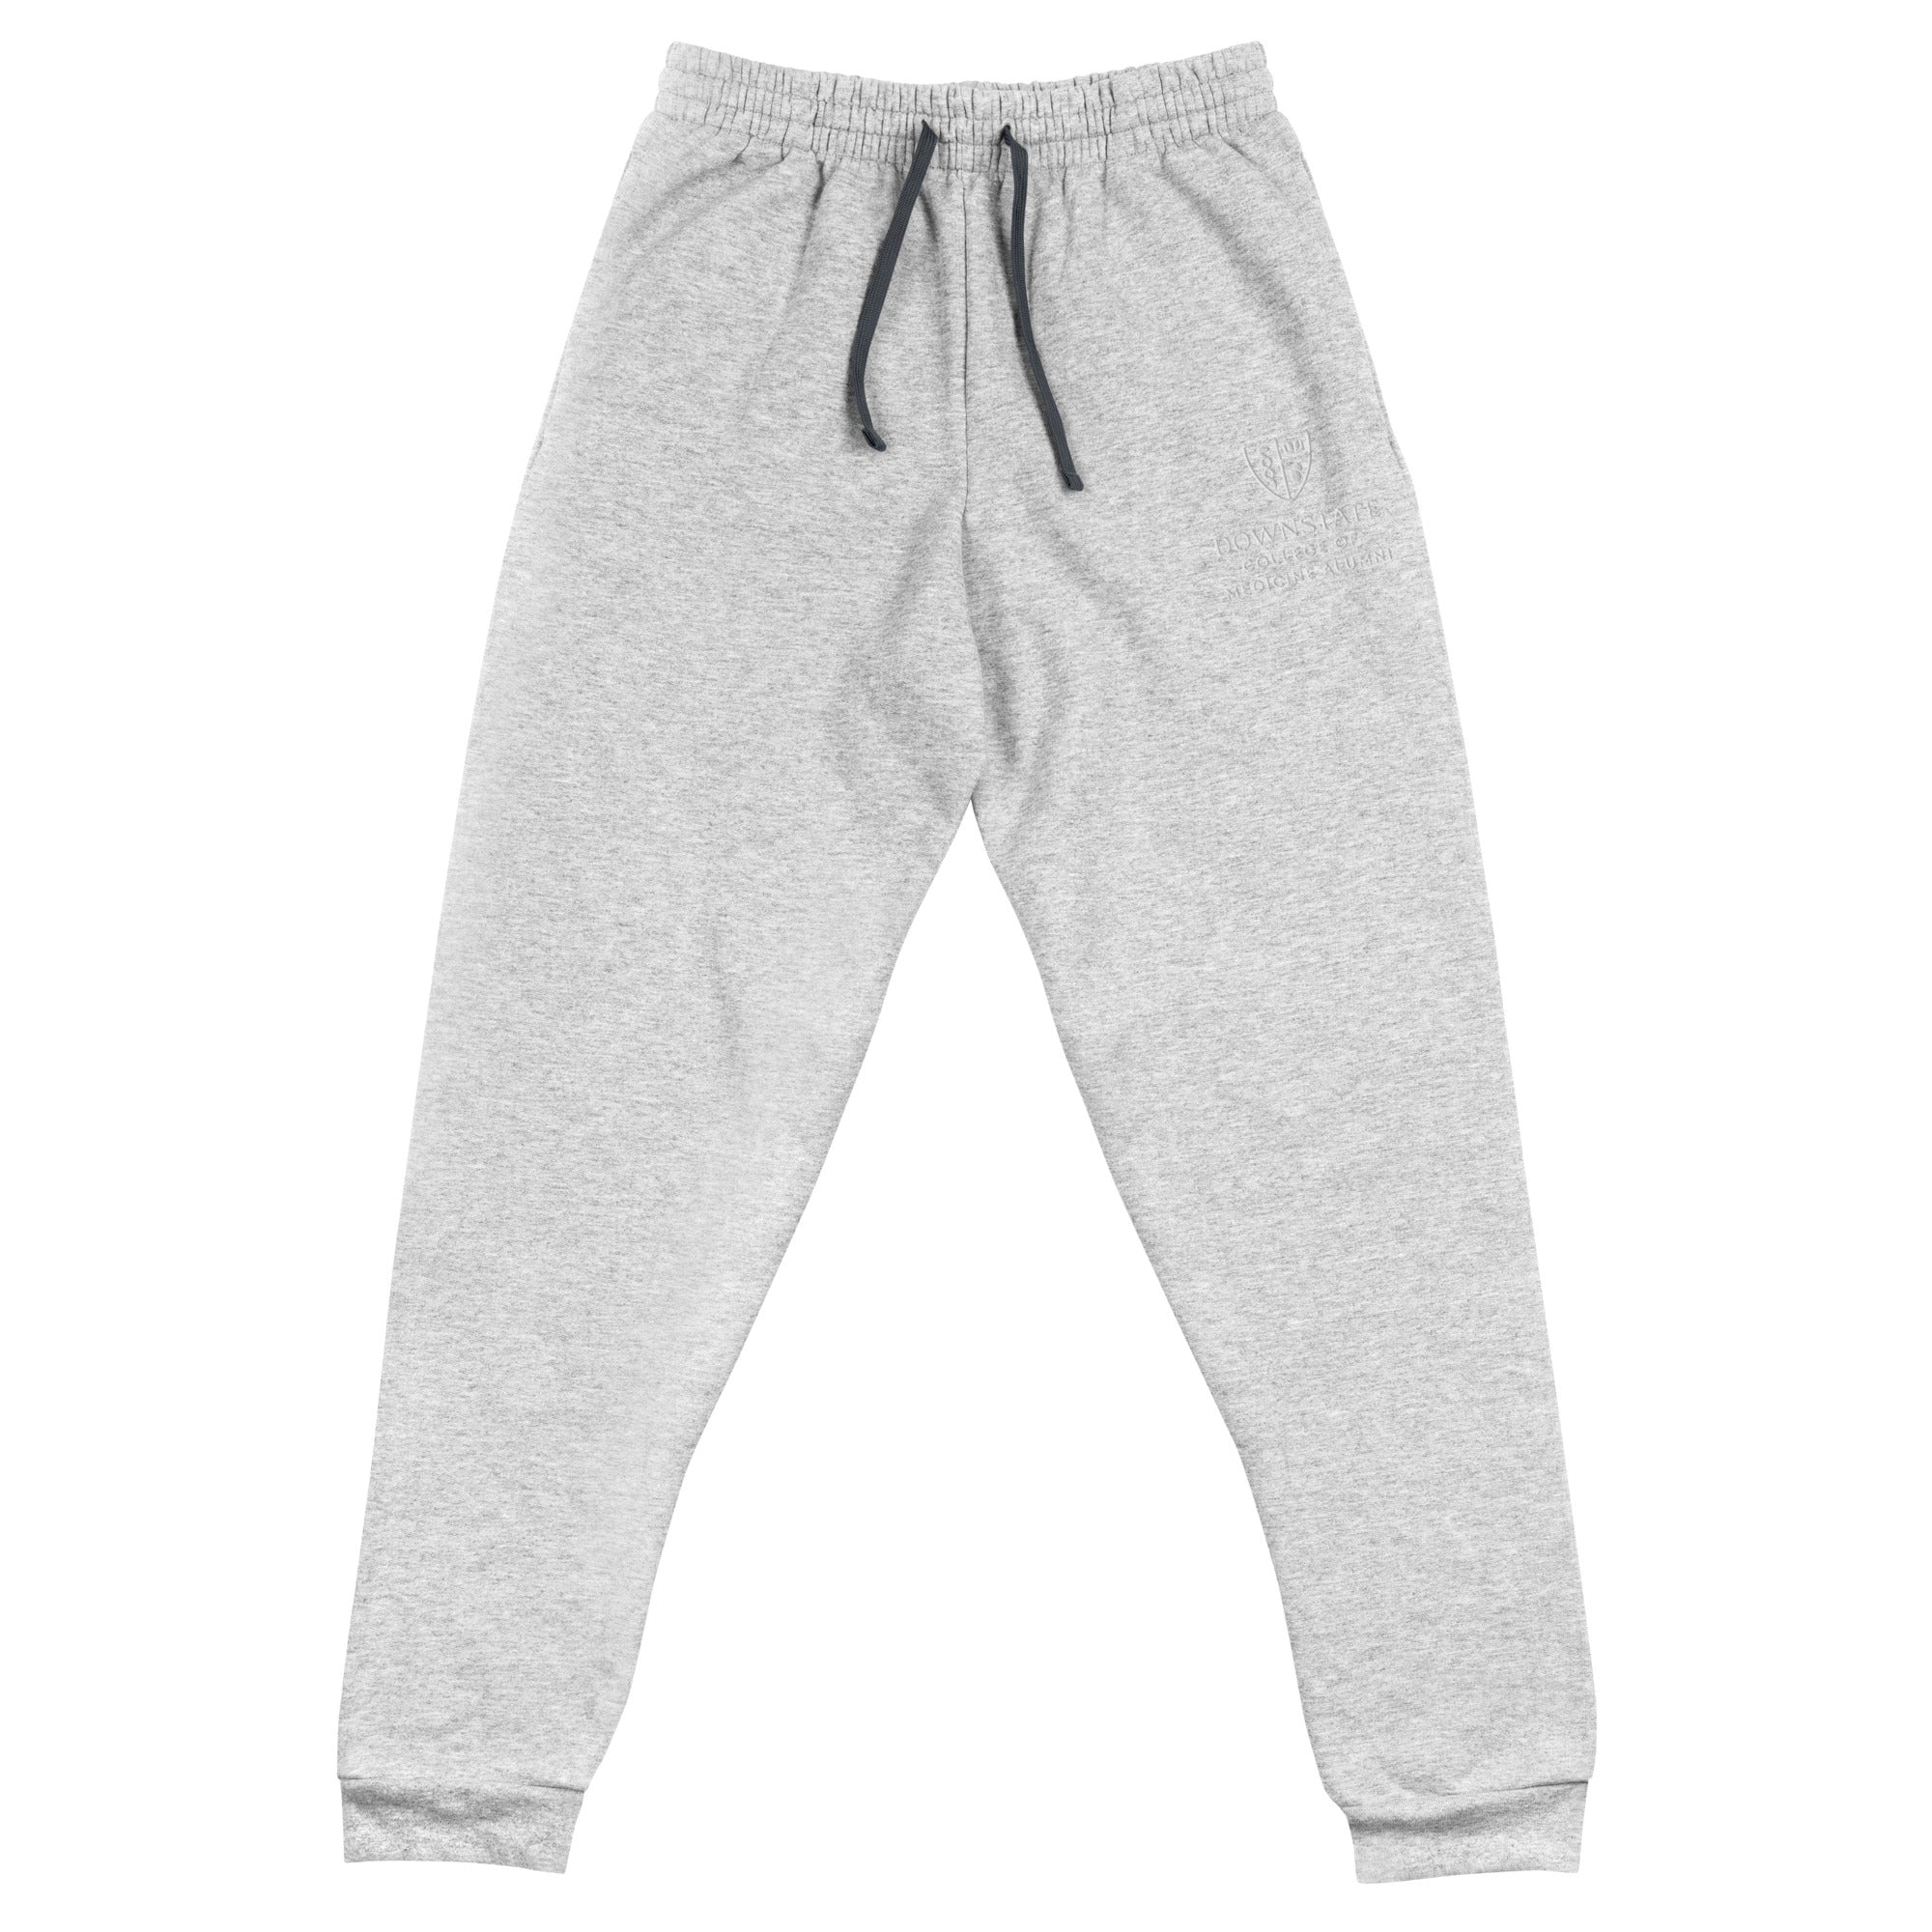 AACMSD Unisex Joggers